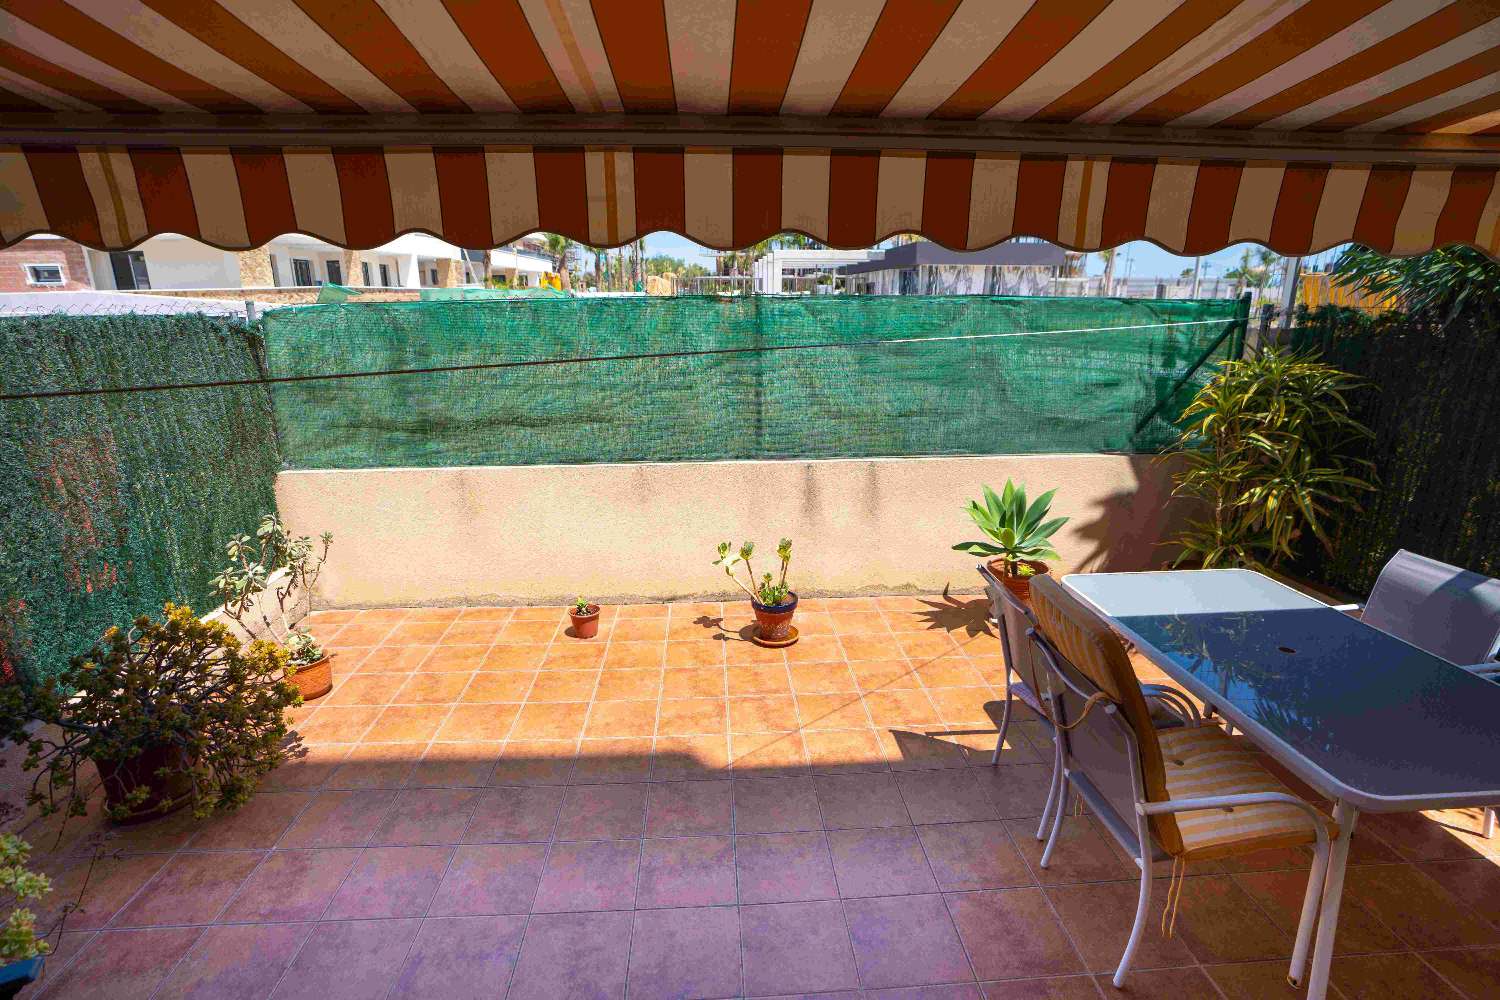 GROUND FLOOR APARTMENT IN RESD. GATED WITH GARAGE SPACE AND STORAGE ROOM IN PLAYA FLAMENCA